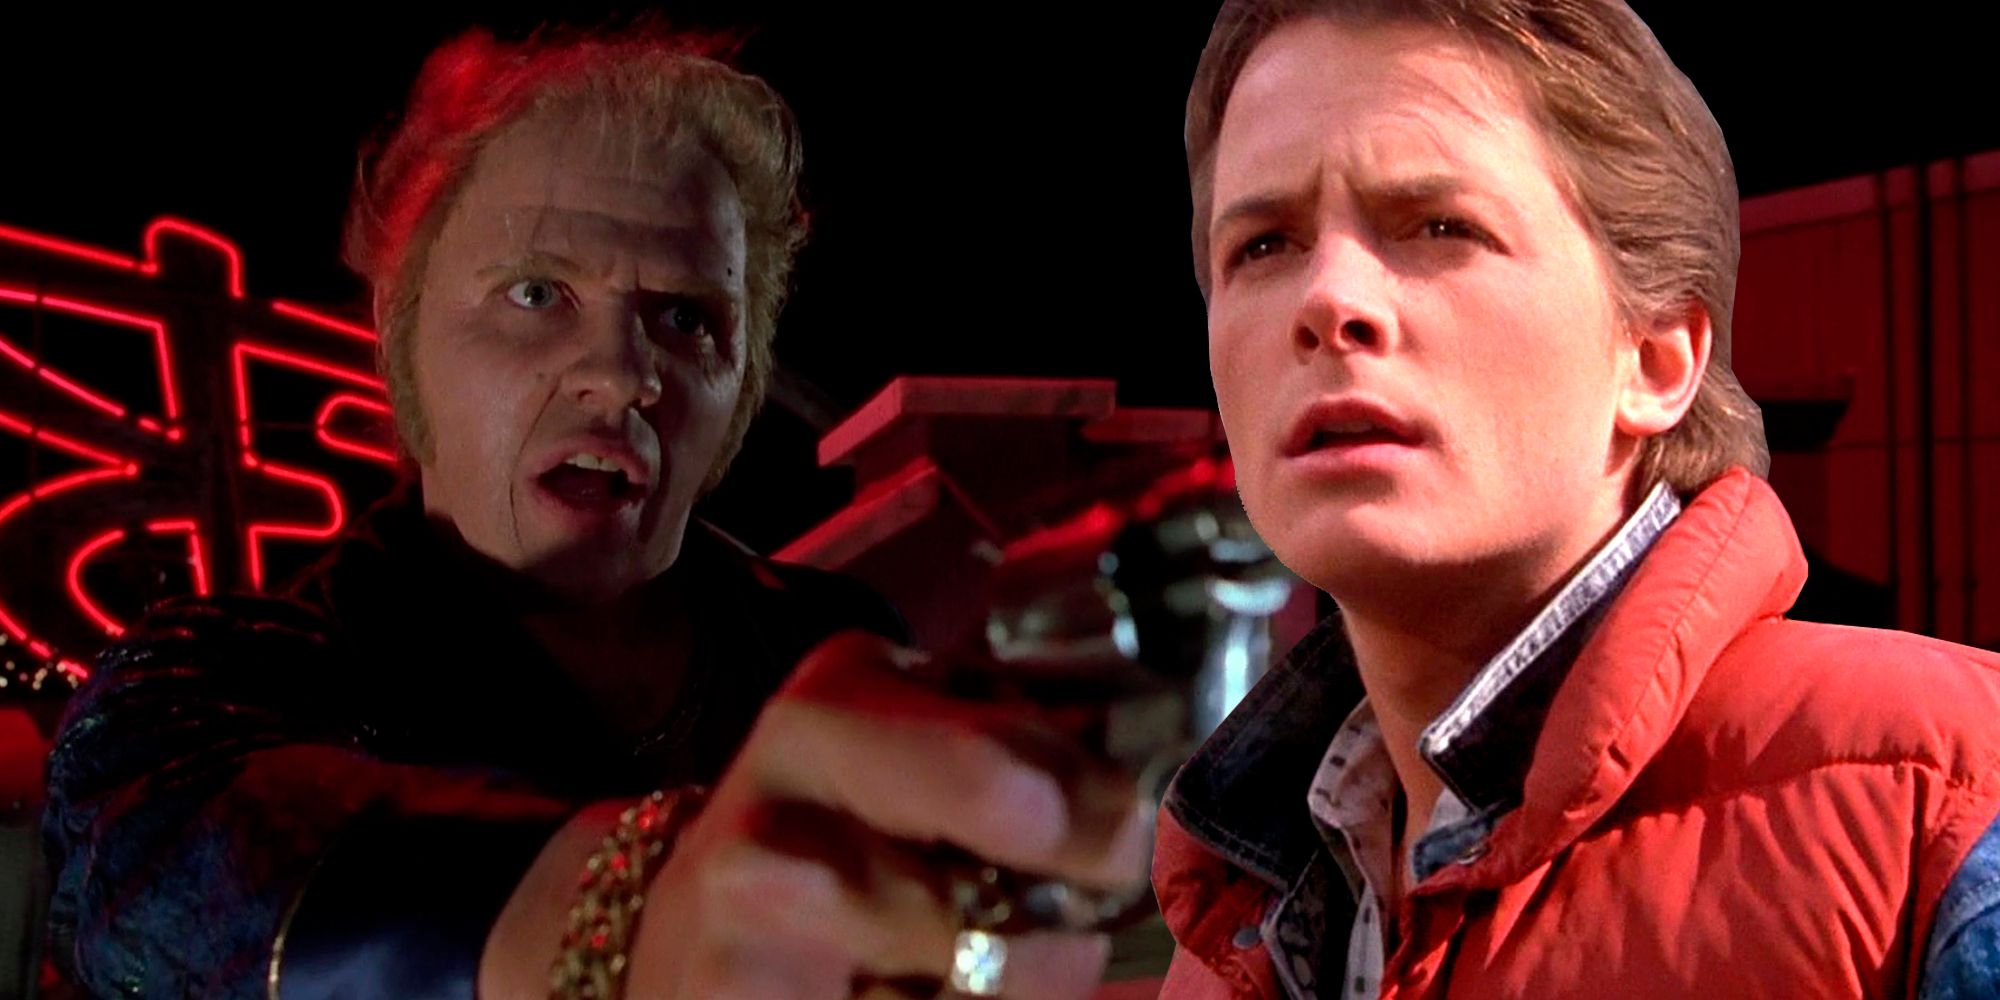 Micheal J Fox as Marty McFly Biff Tannen in Back to the Future Part 2